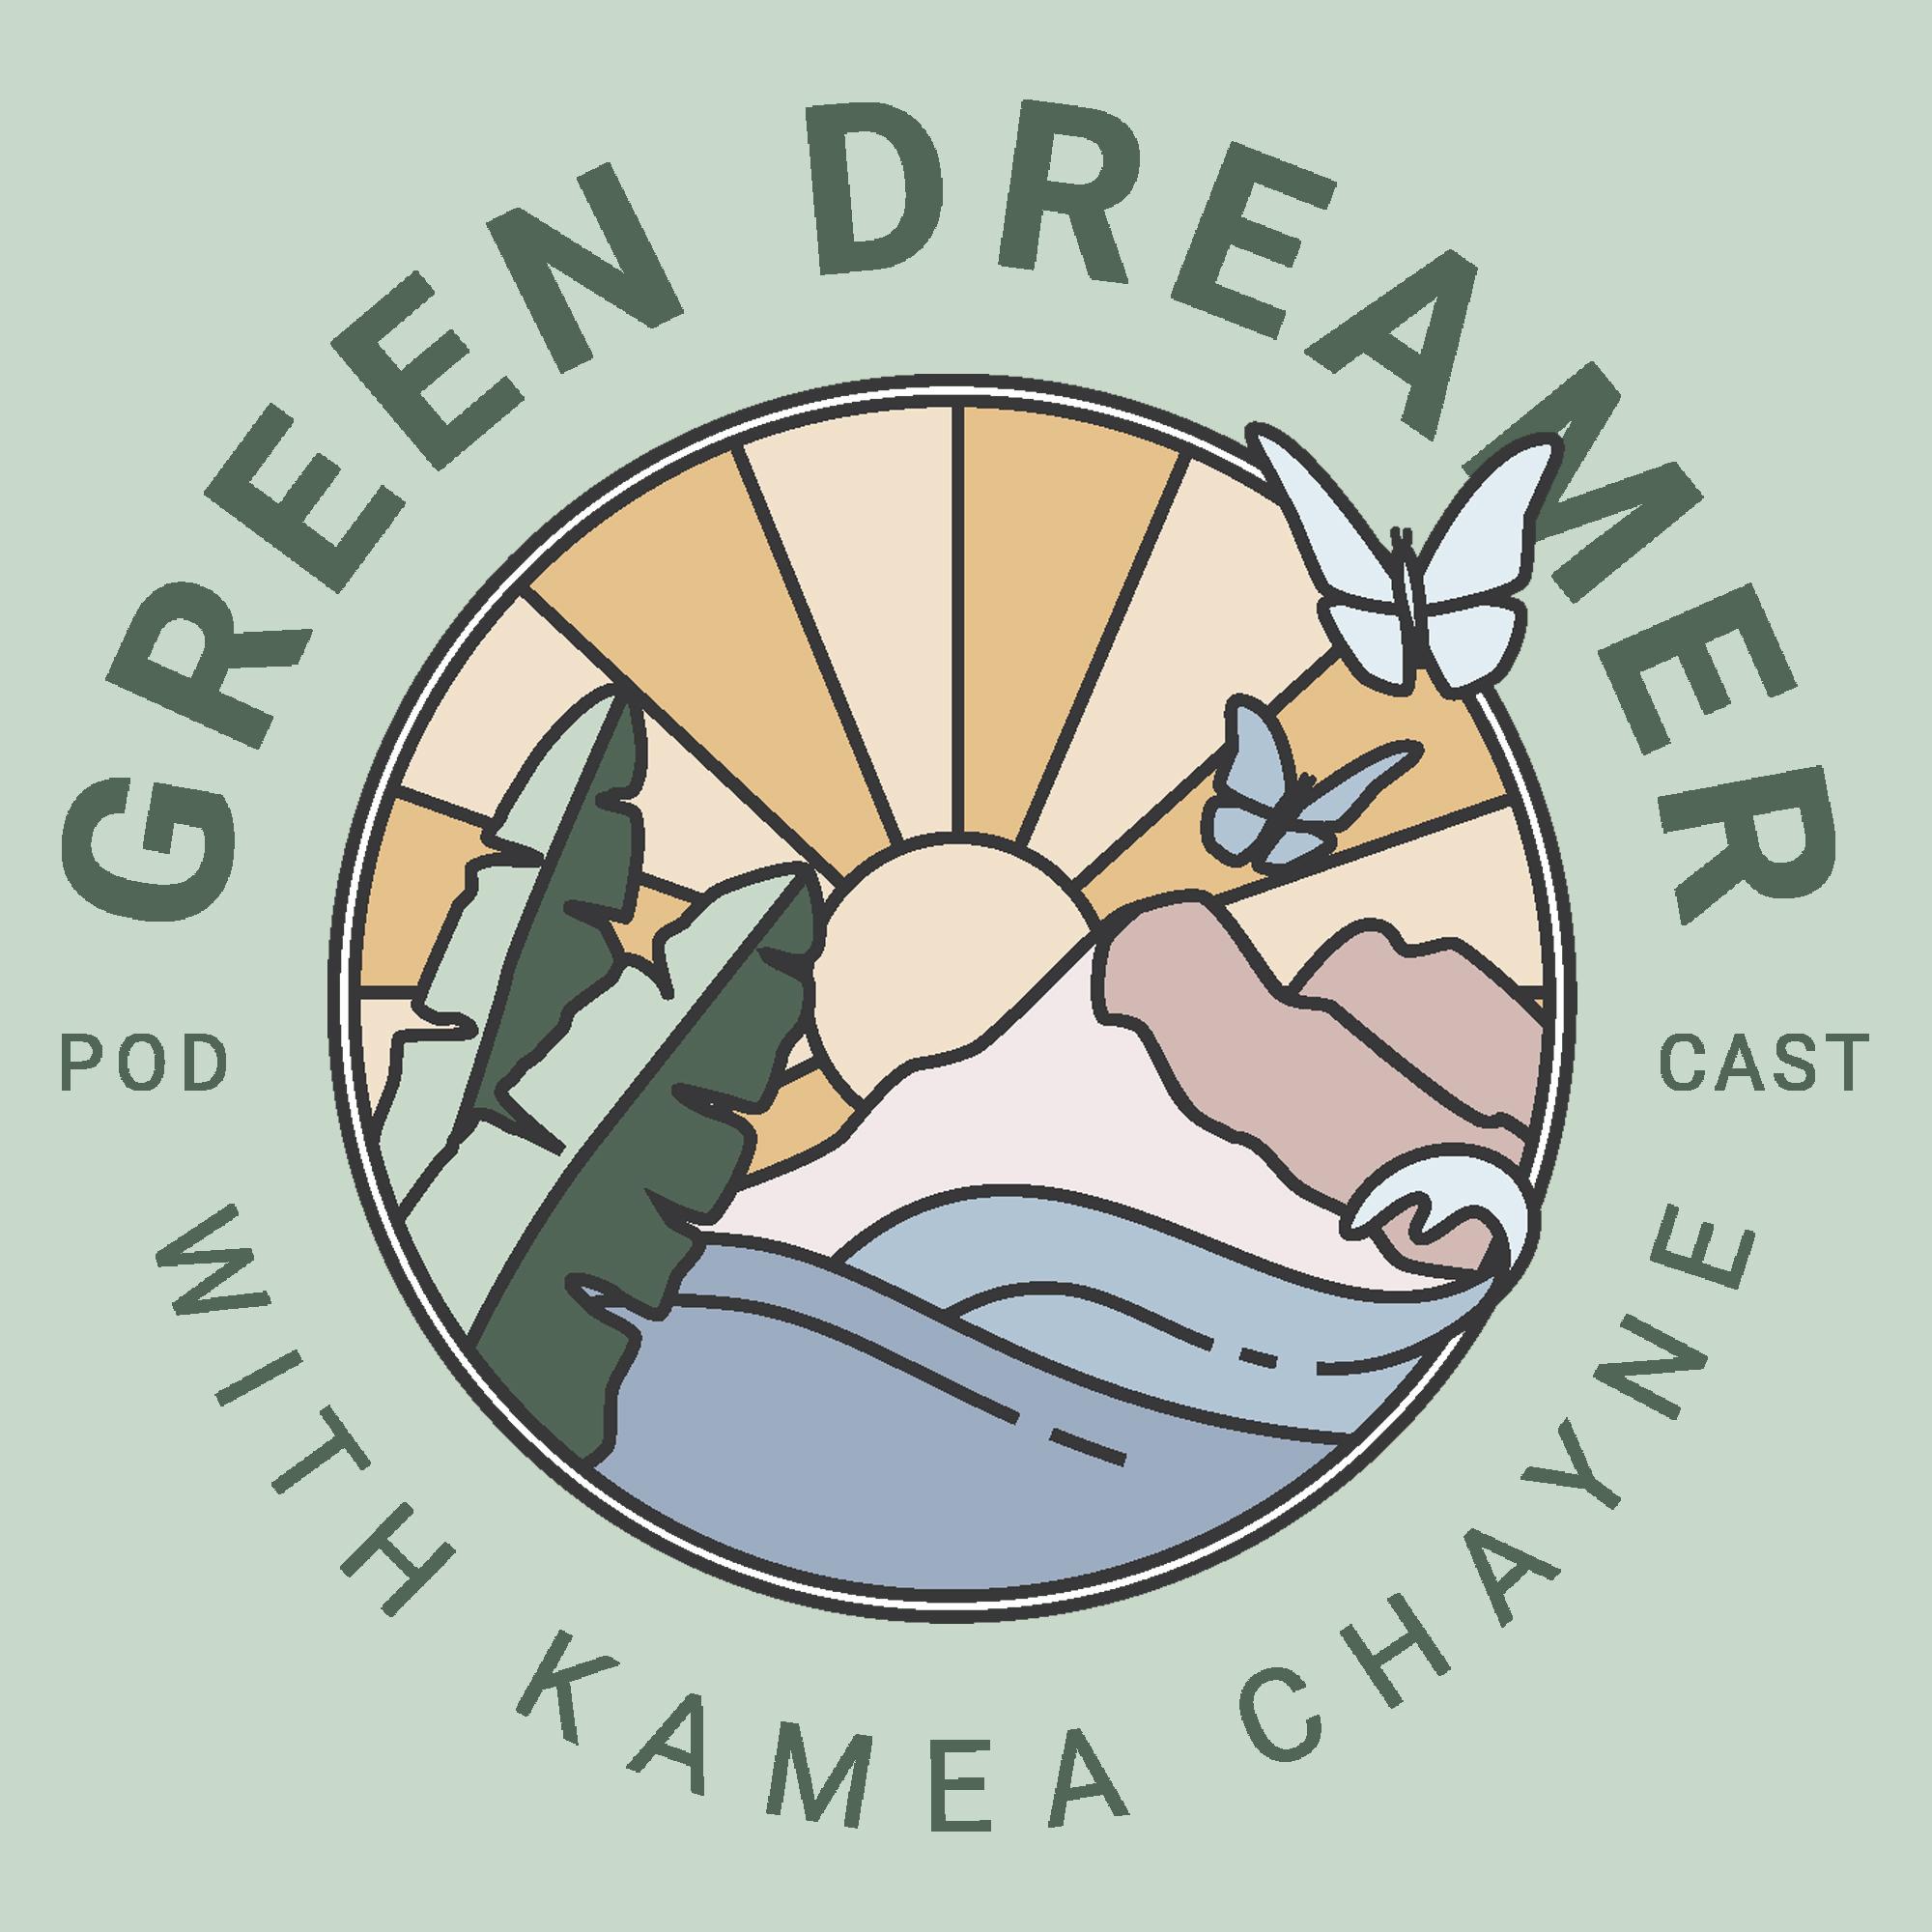 203) Pete Gombert: How affordable housing impacts public health and environmental justice